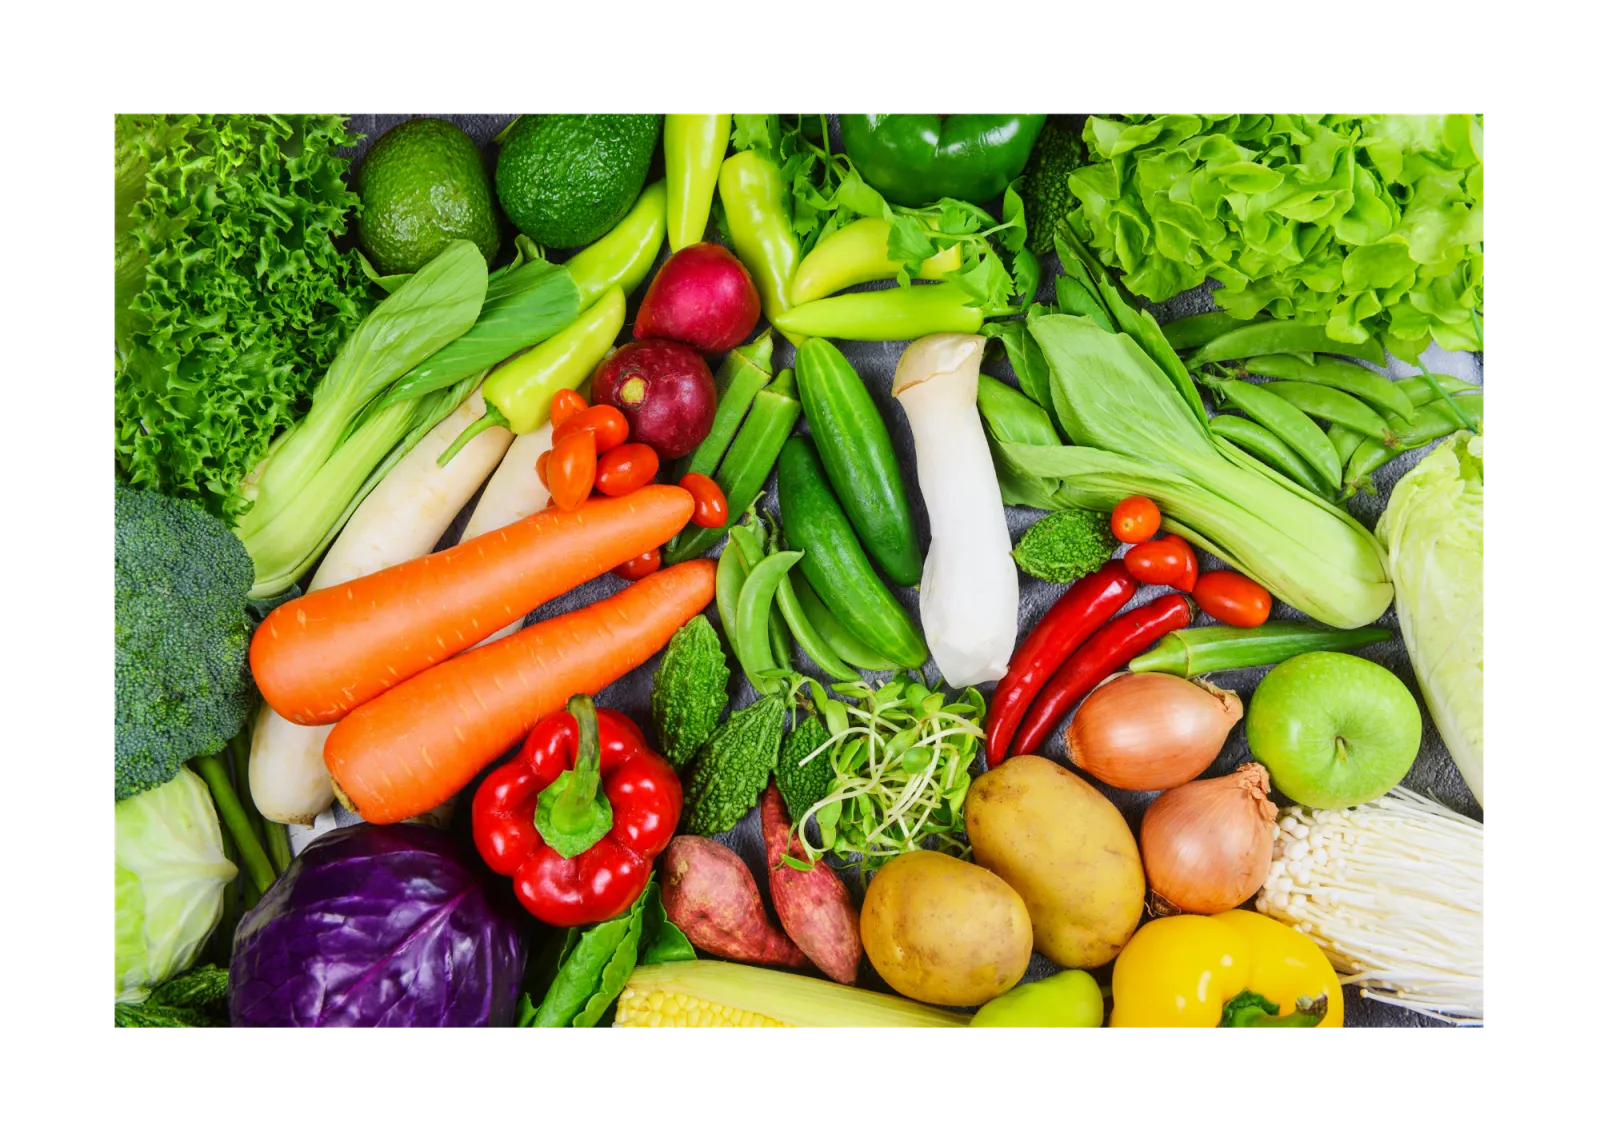 A group of vegetables are all bunched together on a table. Some of the foods include carrots, lettuce, peppers, cucumbers, potatoes, apples, celery and more.